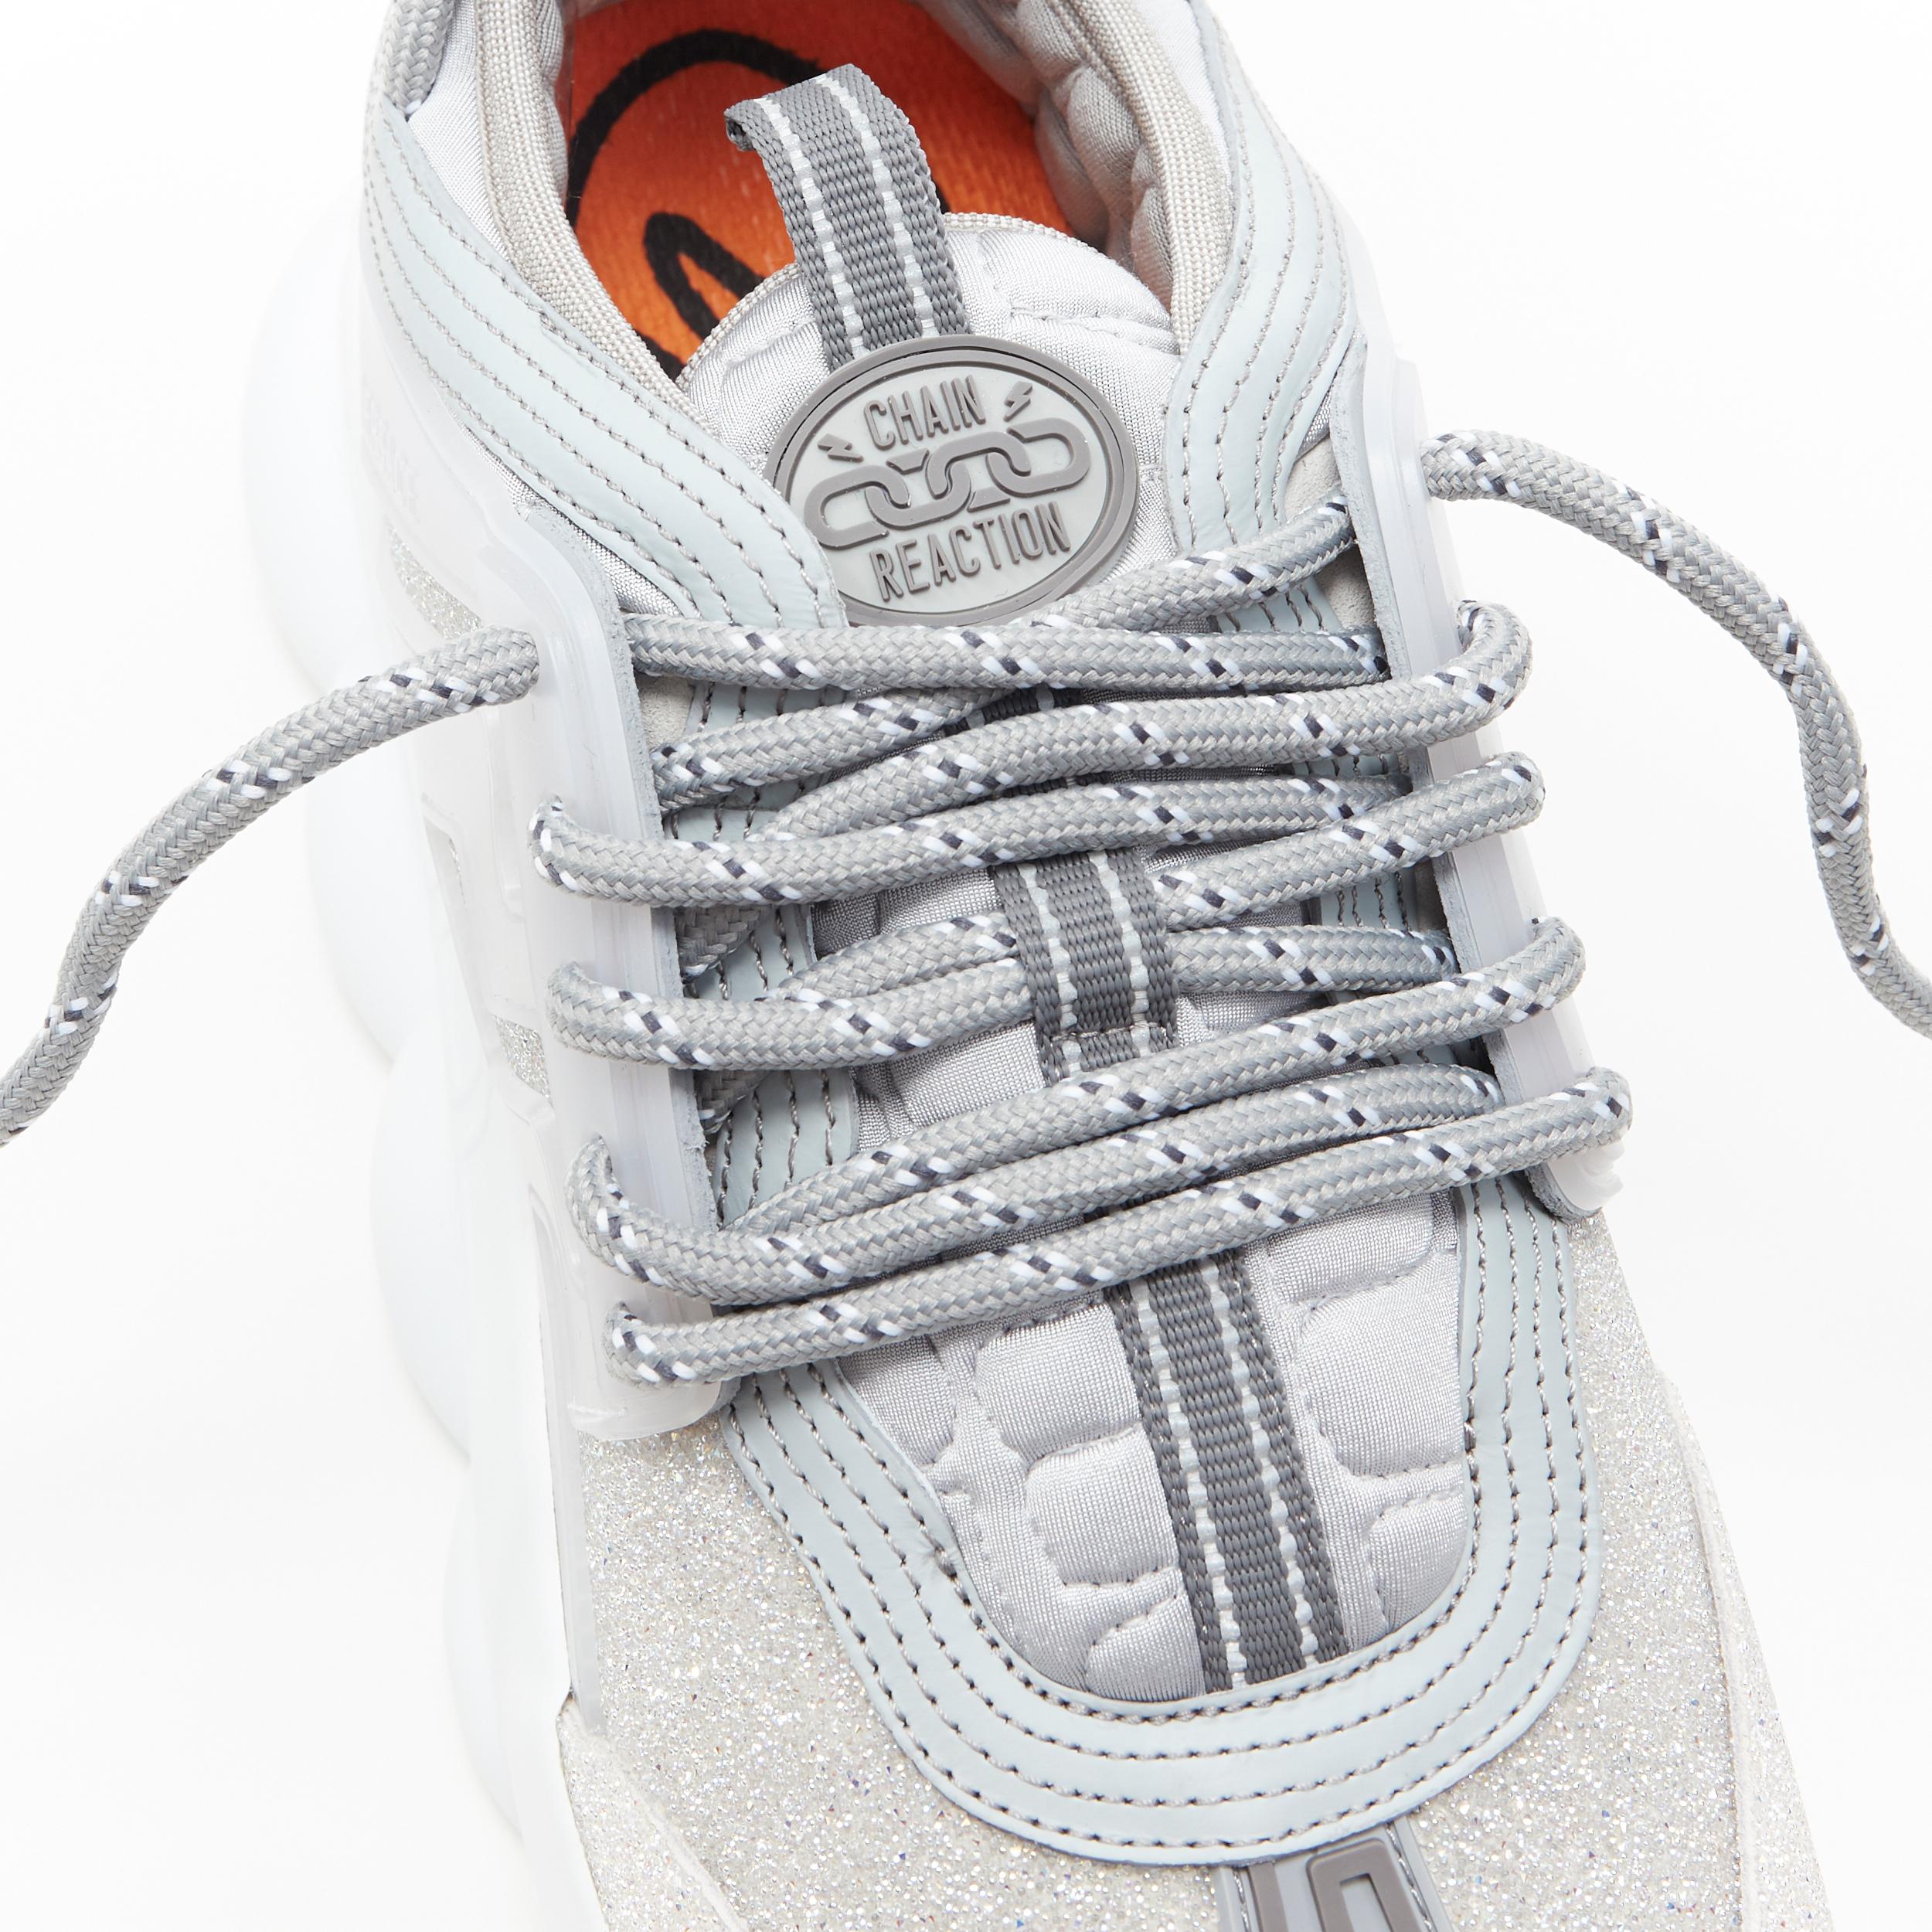 new VERSACE Chain Reaction Reflective Silver Crystal Rhinestone sneaker EU41 US8 For Sale 4